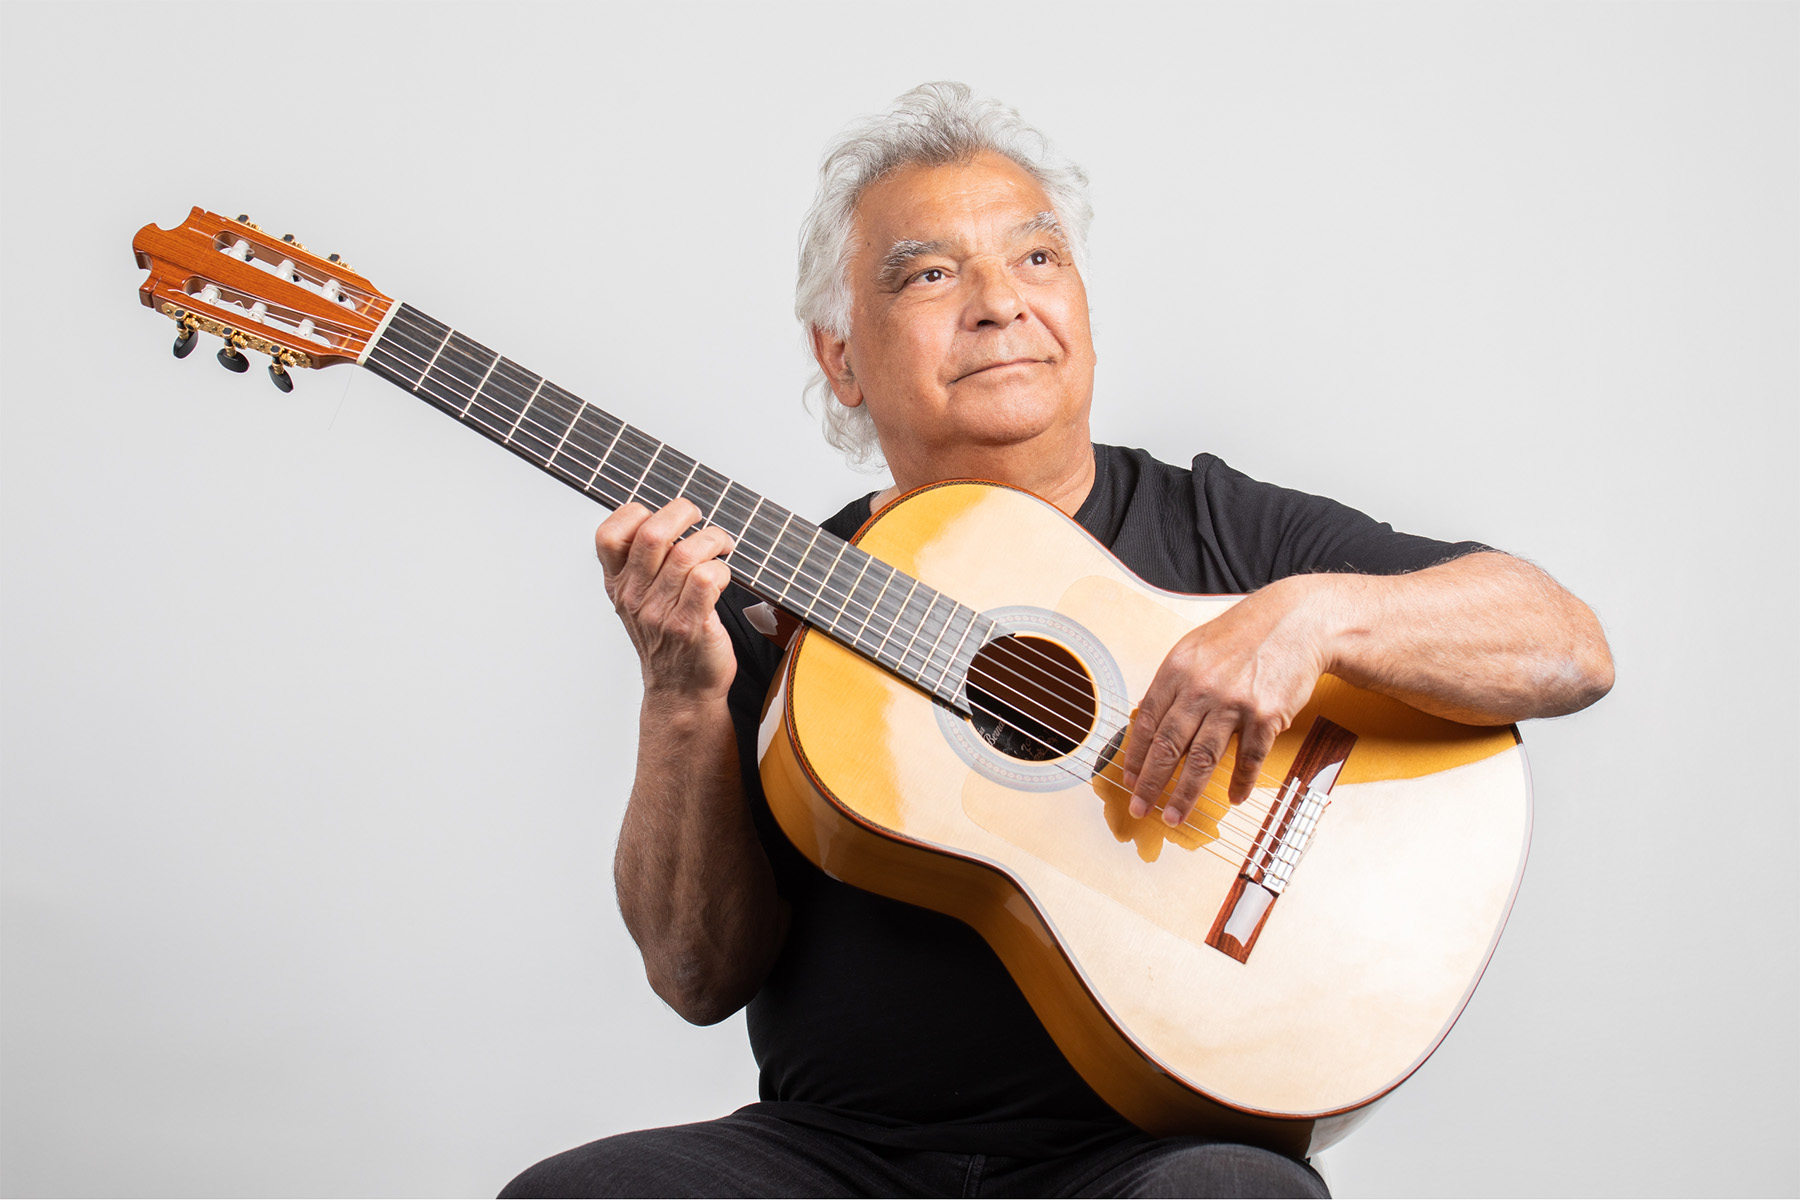 Nicolas Reyes, lead singer, guitarist, songwriter and founder of the Gipsy Kings